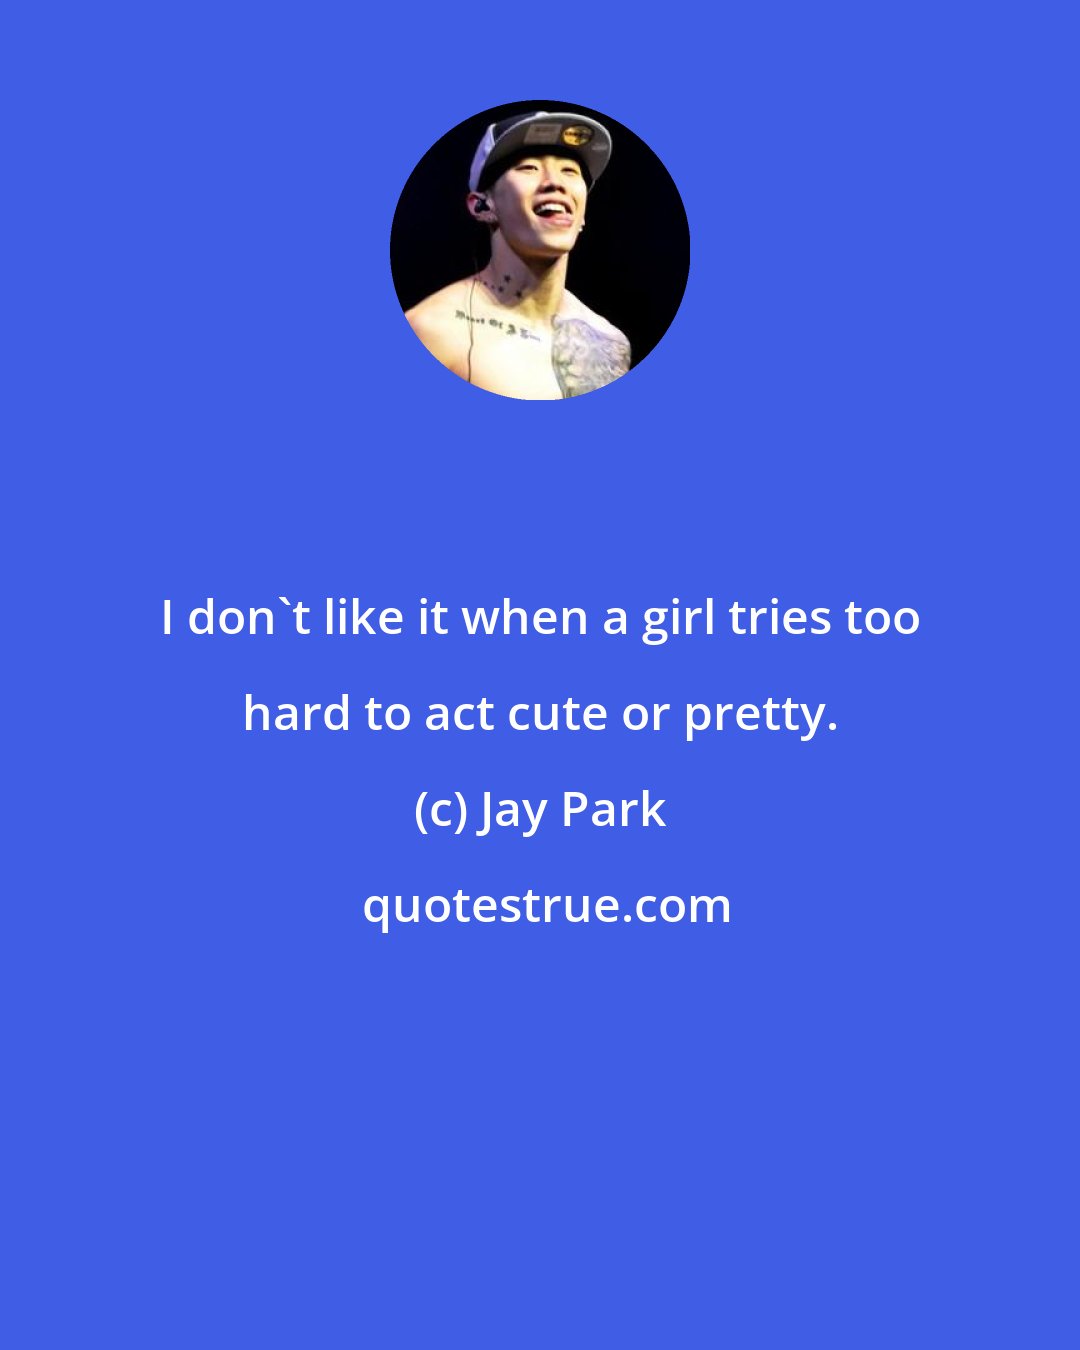 Jay Park: I don't like it when a girl tries too hard to act cute or pretty.